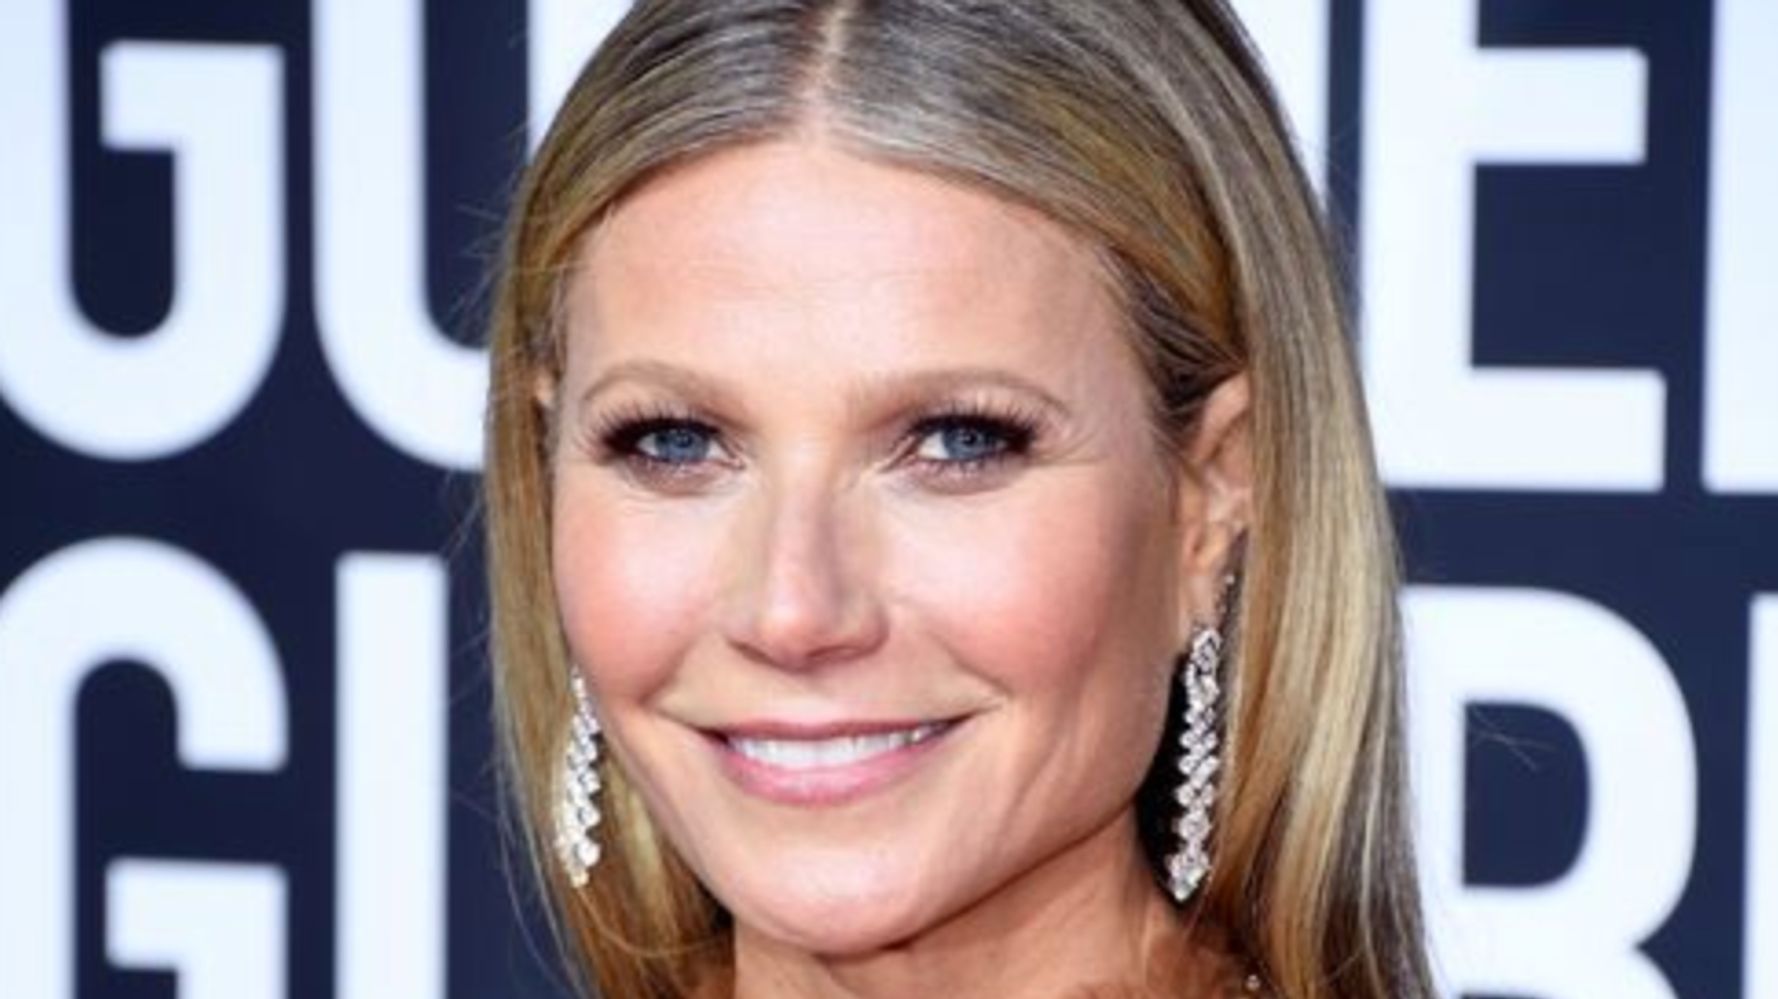 Gwyneth Paltrow reveals that she’s a longtime carrier of COVID-19 with ‘healing’ yet to be done